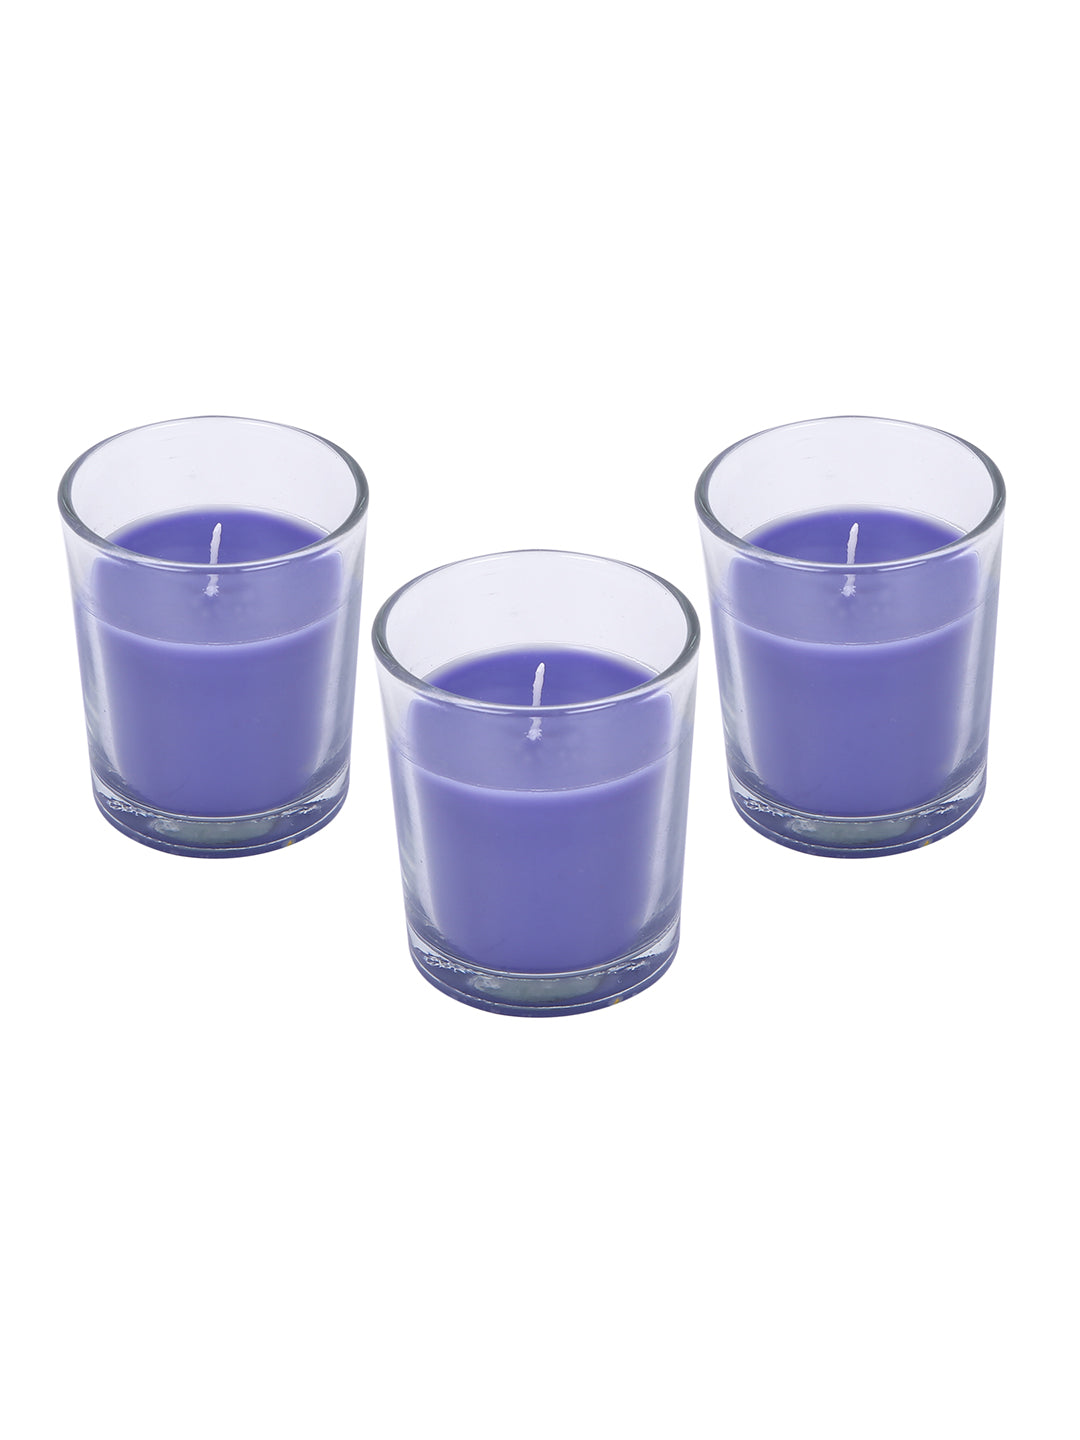 Set of 3 Hosley® Highly Fragranced Lavender Fields Filled Glass Candles, 1.6 Oz wax each